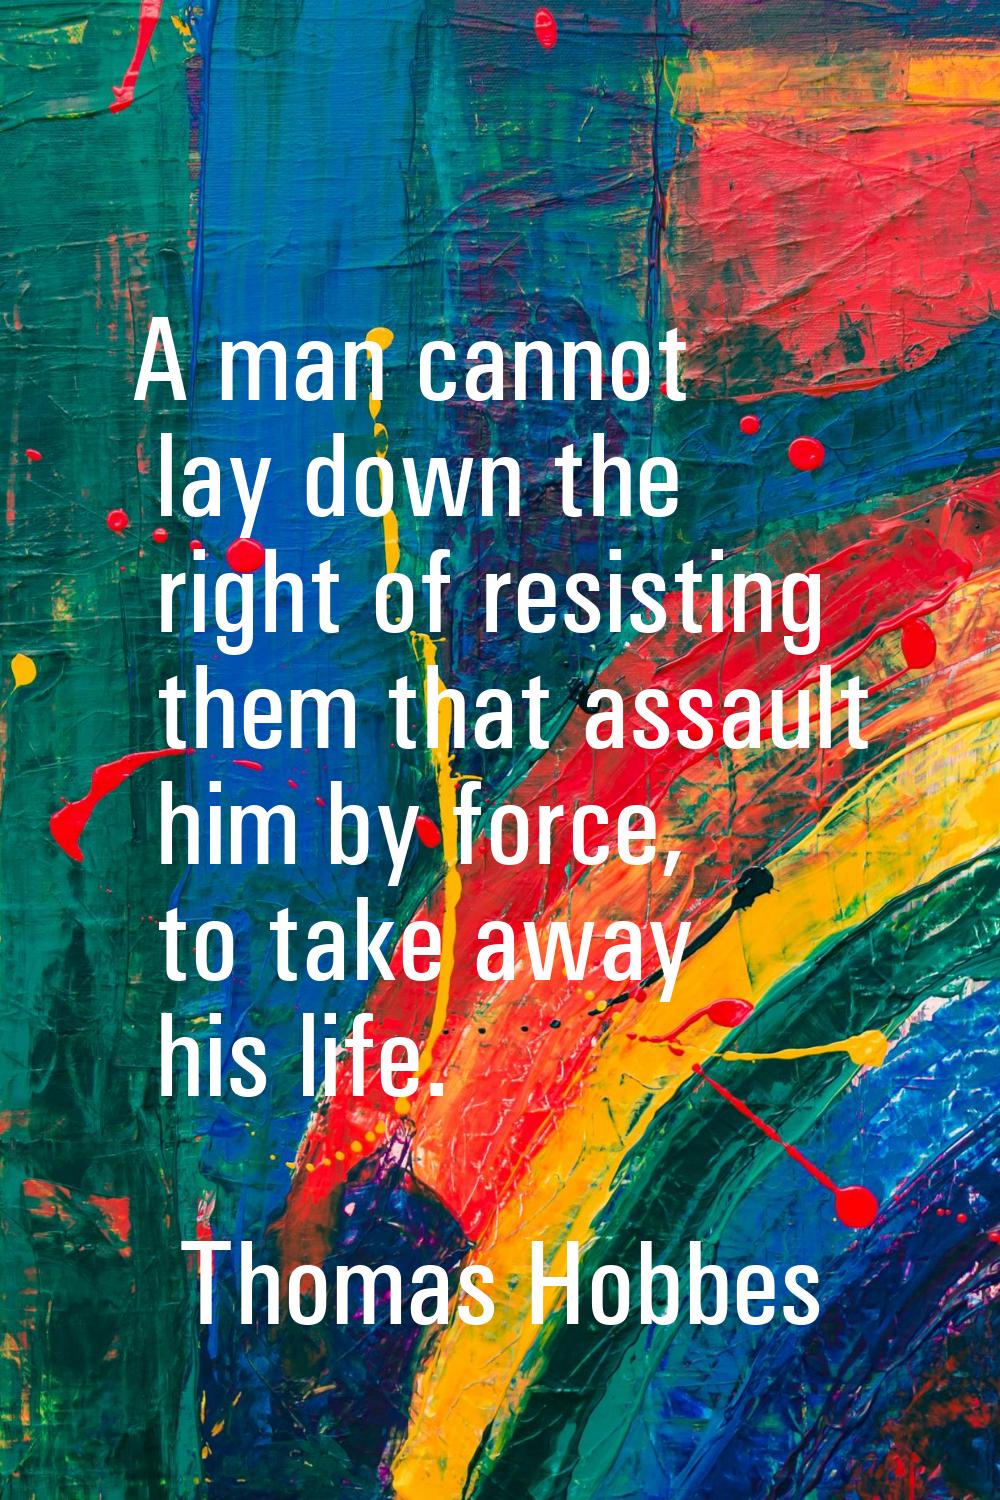 A man cannot lay down the right of resisting them that assault him by force, to take away his life.